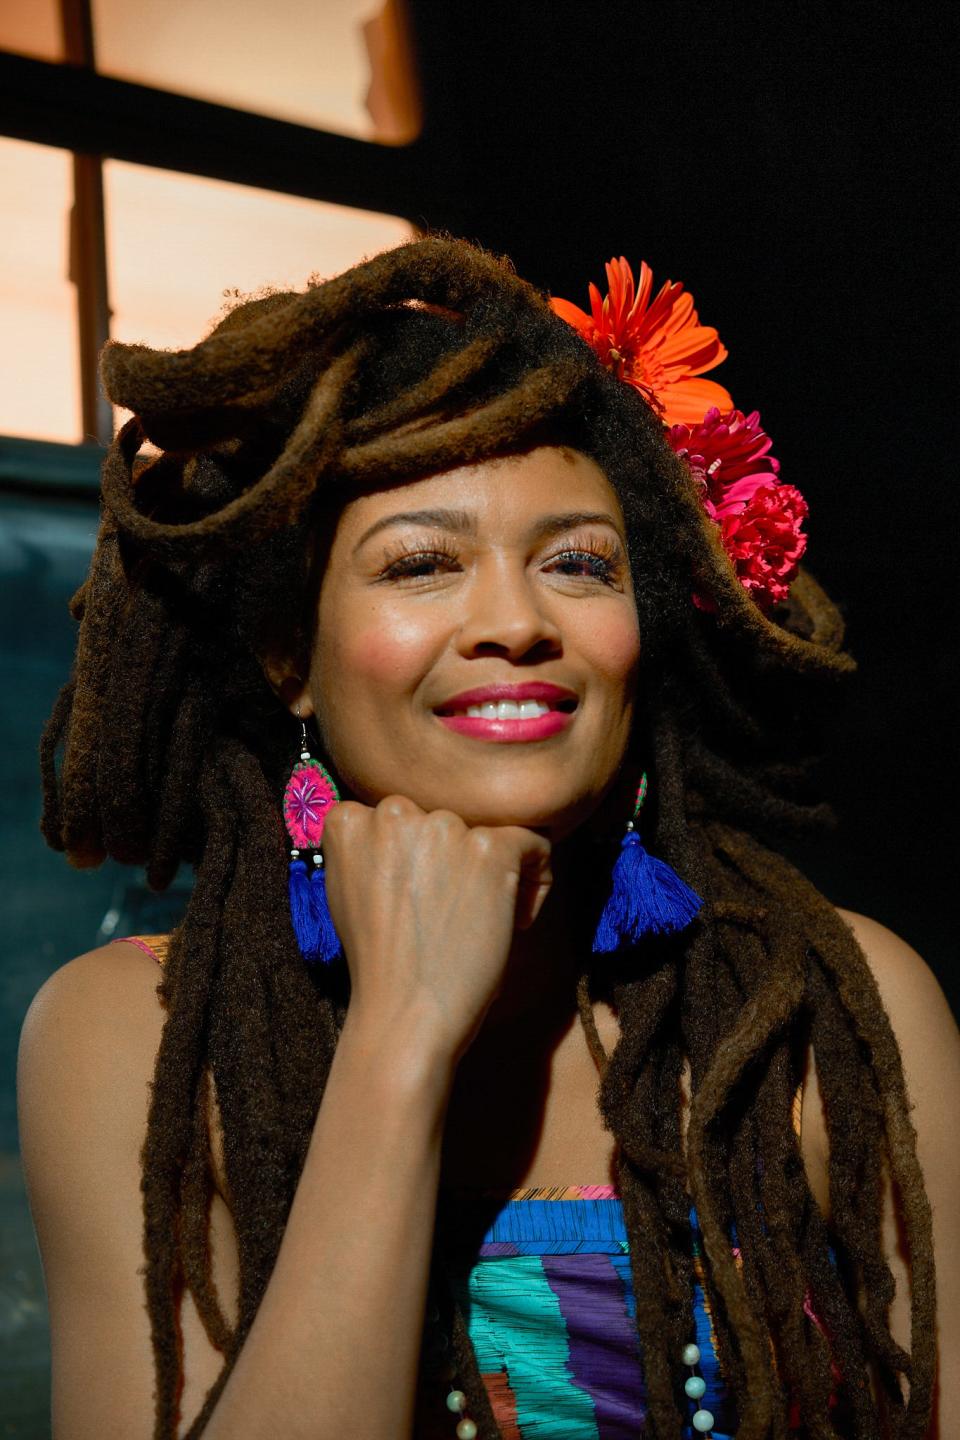 Memphis-based Americana artist Valerie June is highlighted in Amazon Music's latest documentary, "For Love and Country."